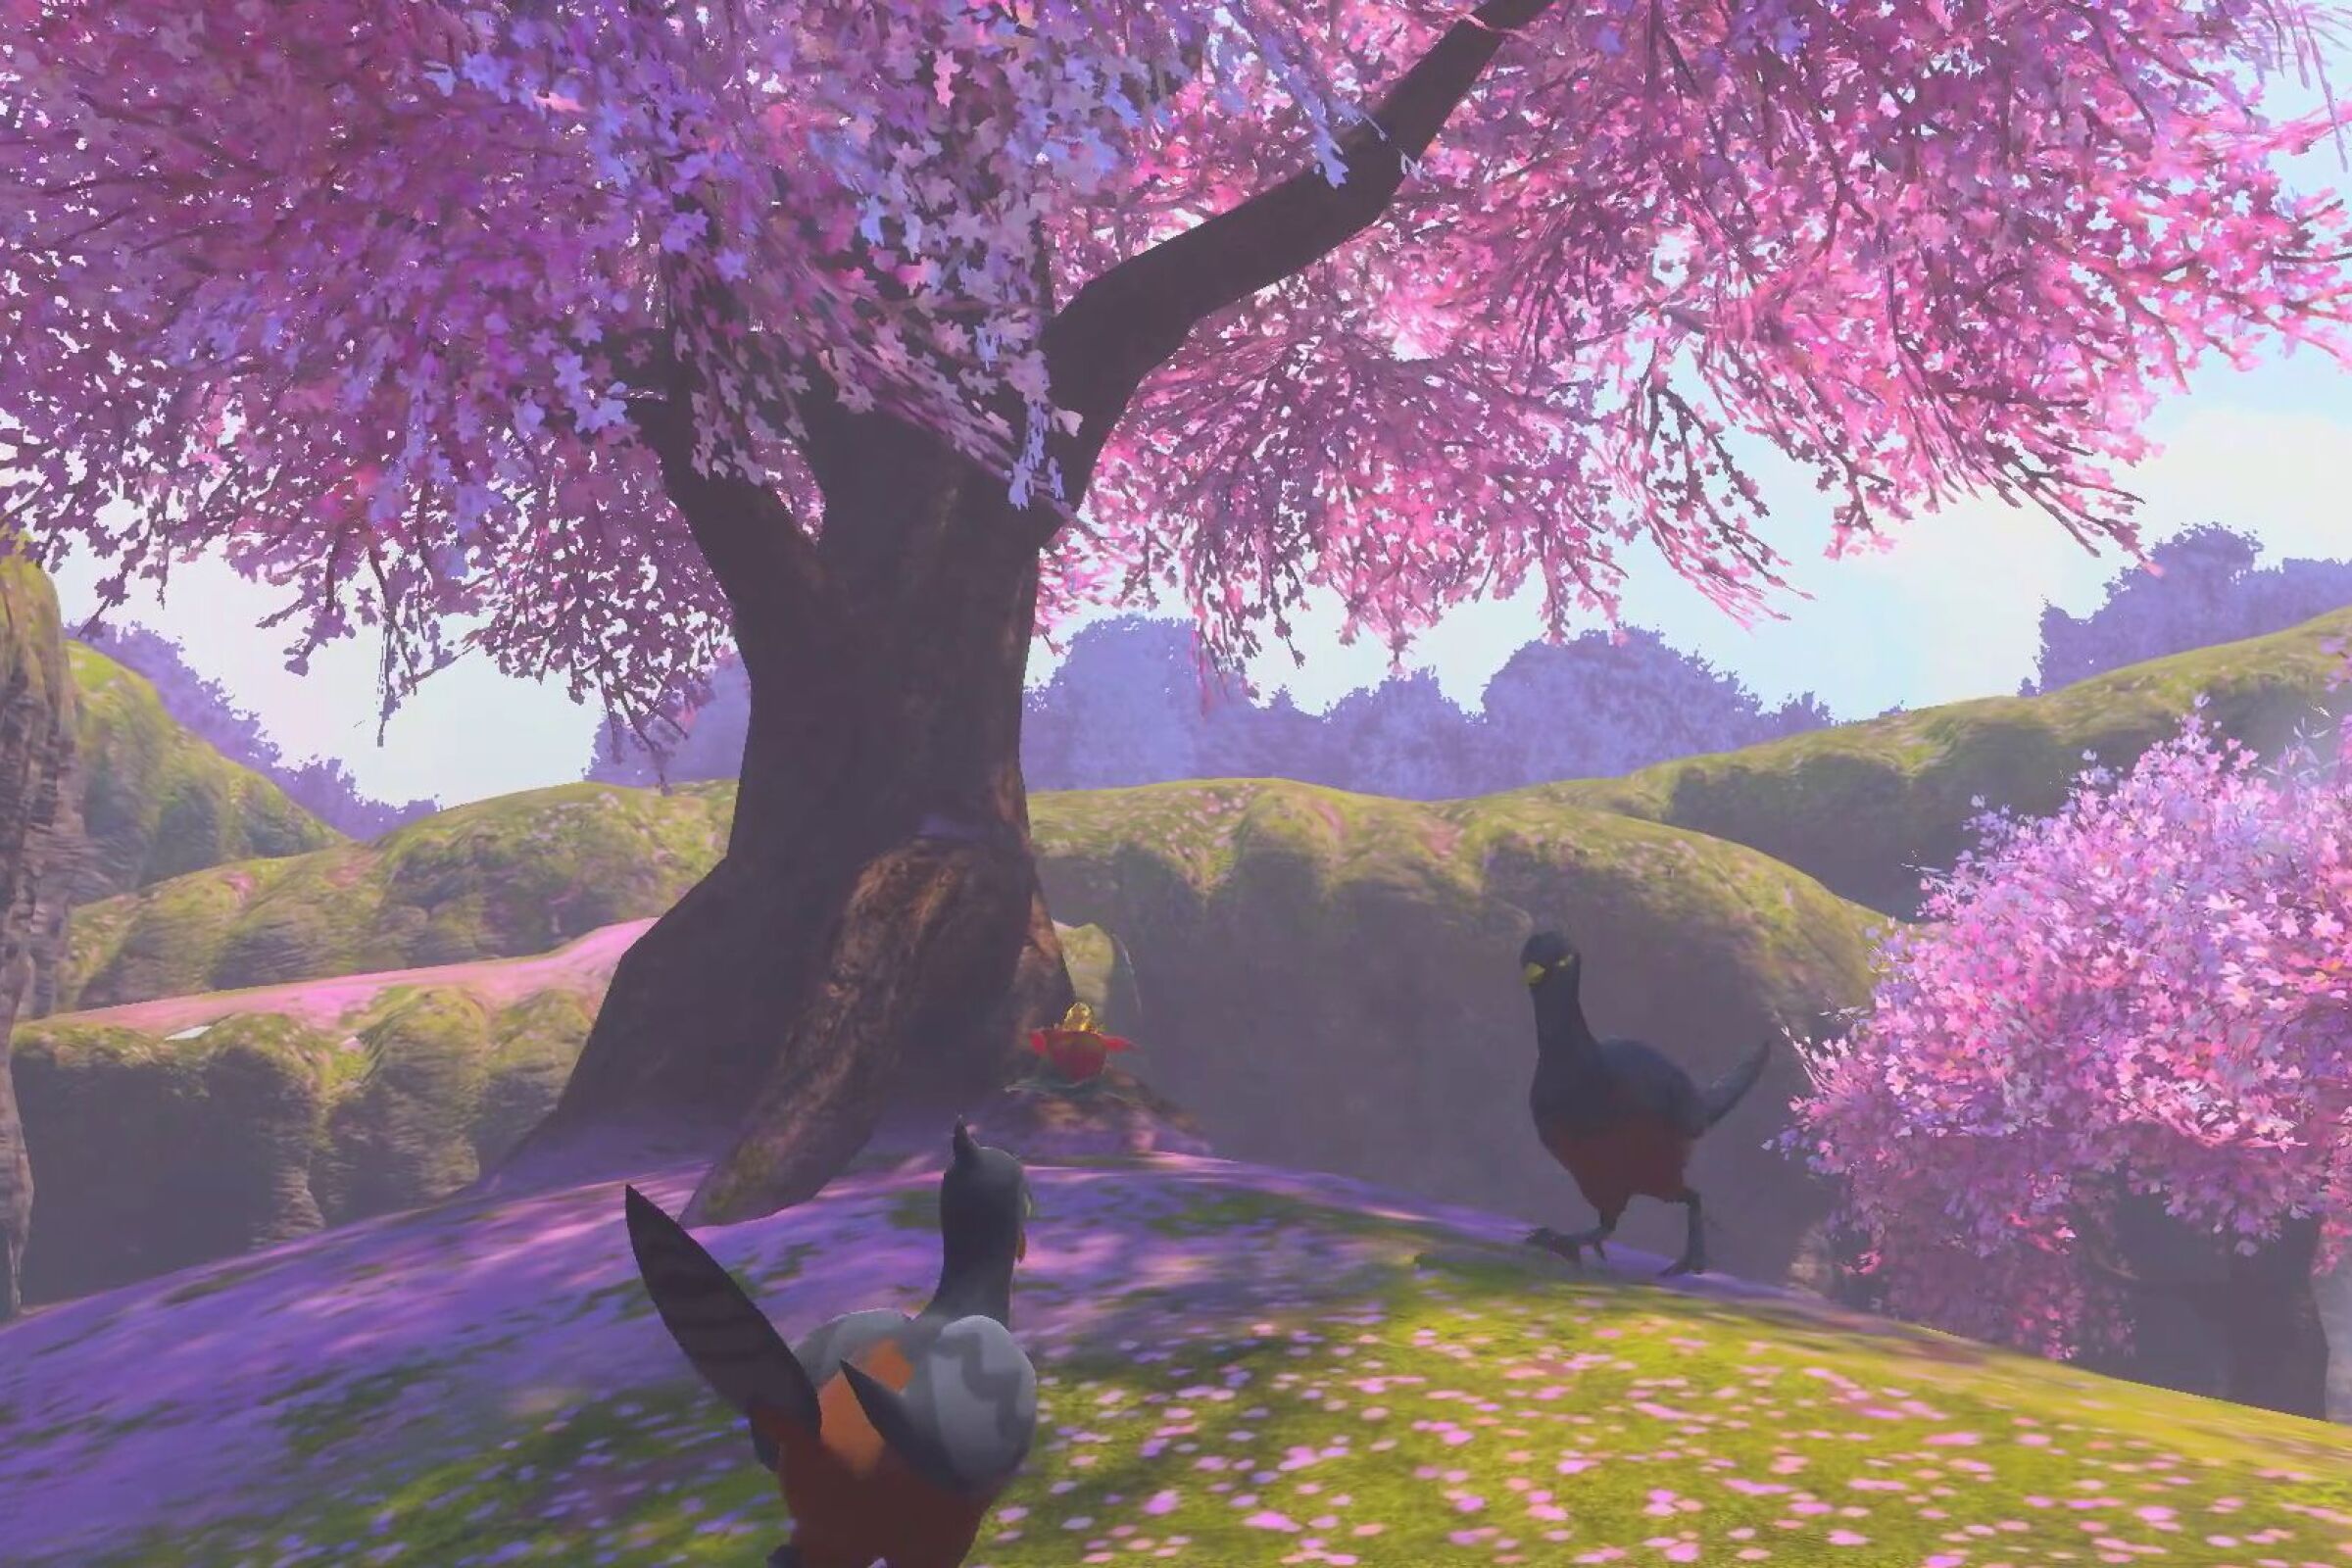 Birds strut among flowering trees in the "New Pokémon Snap" game.